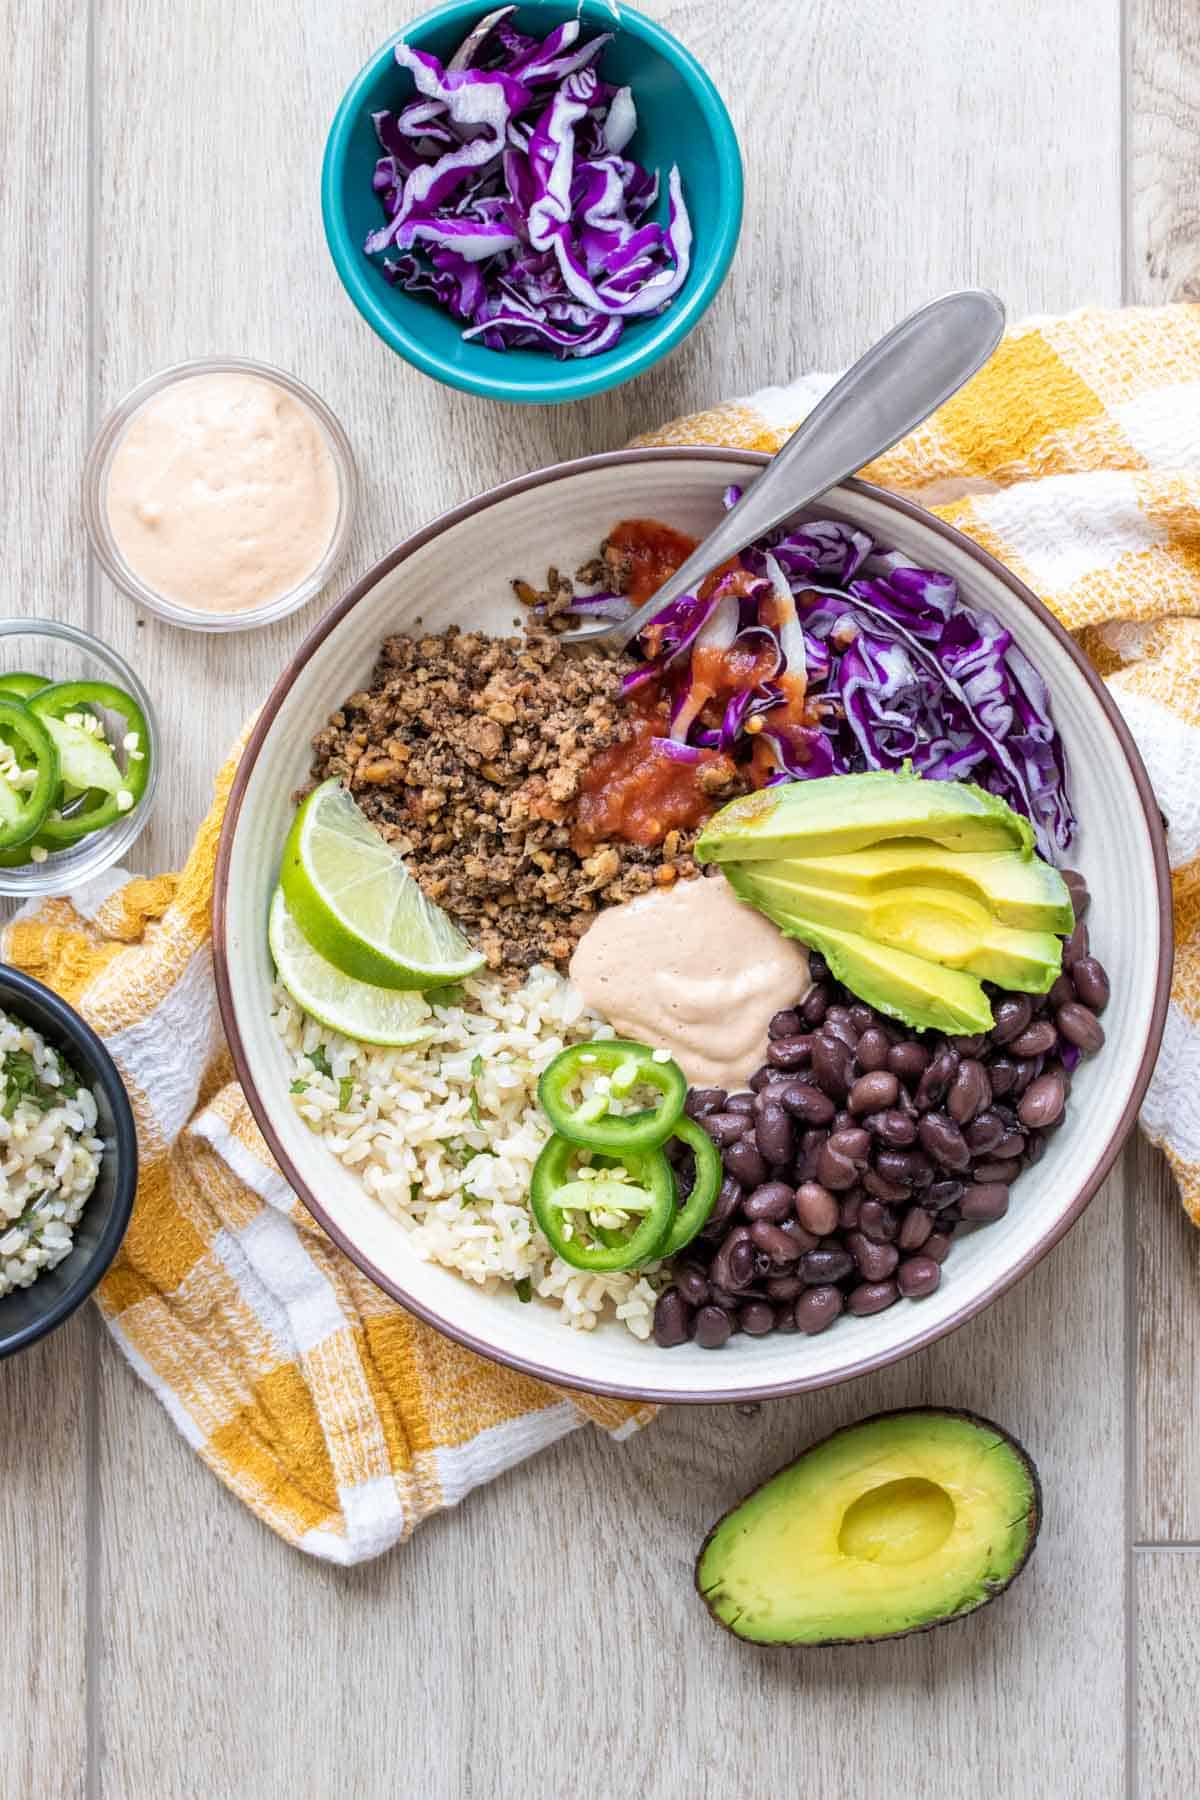 A cream colored bowl with a taco bowl inside on a wooden surface surrounded by other ingredients